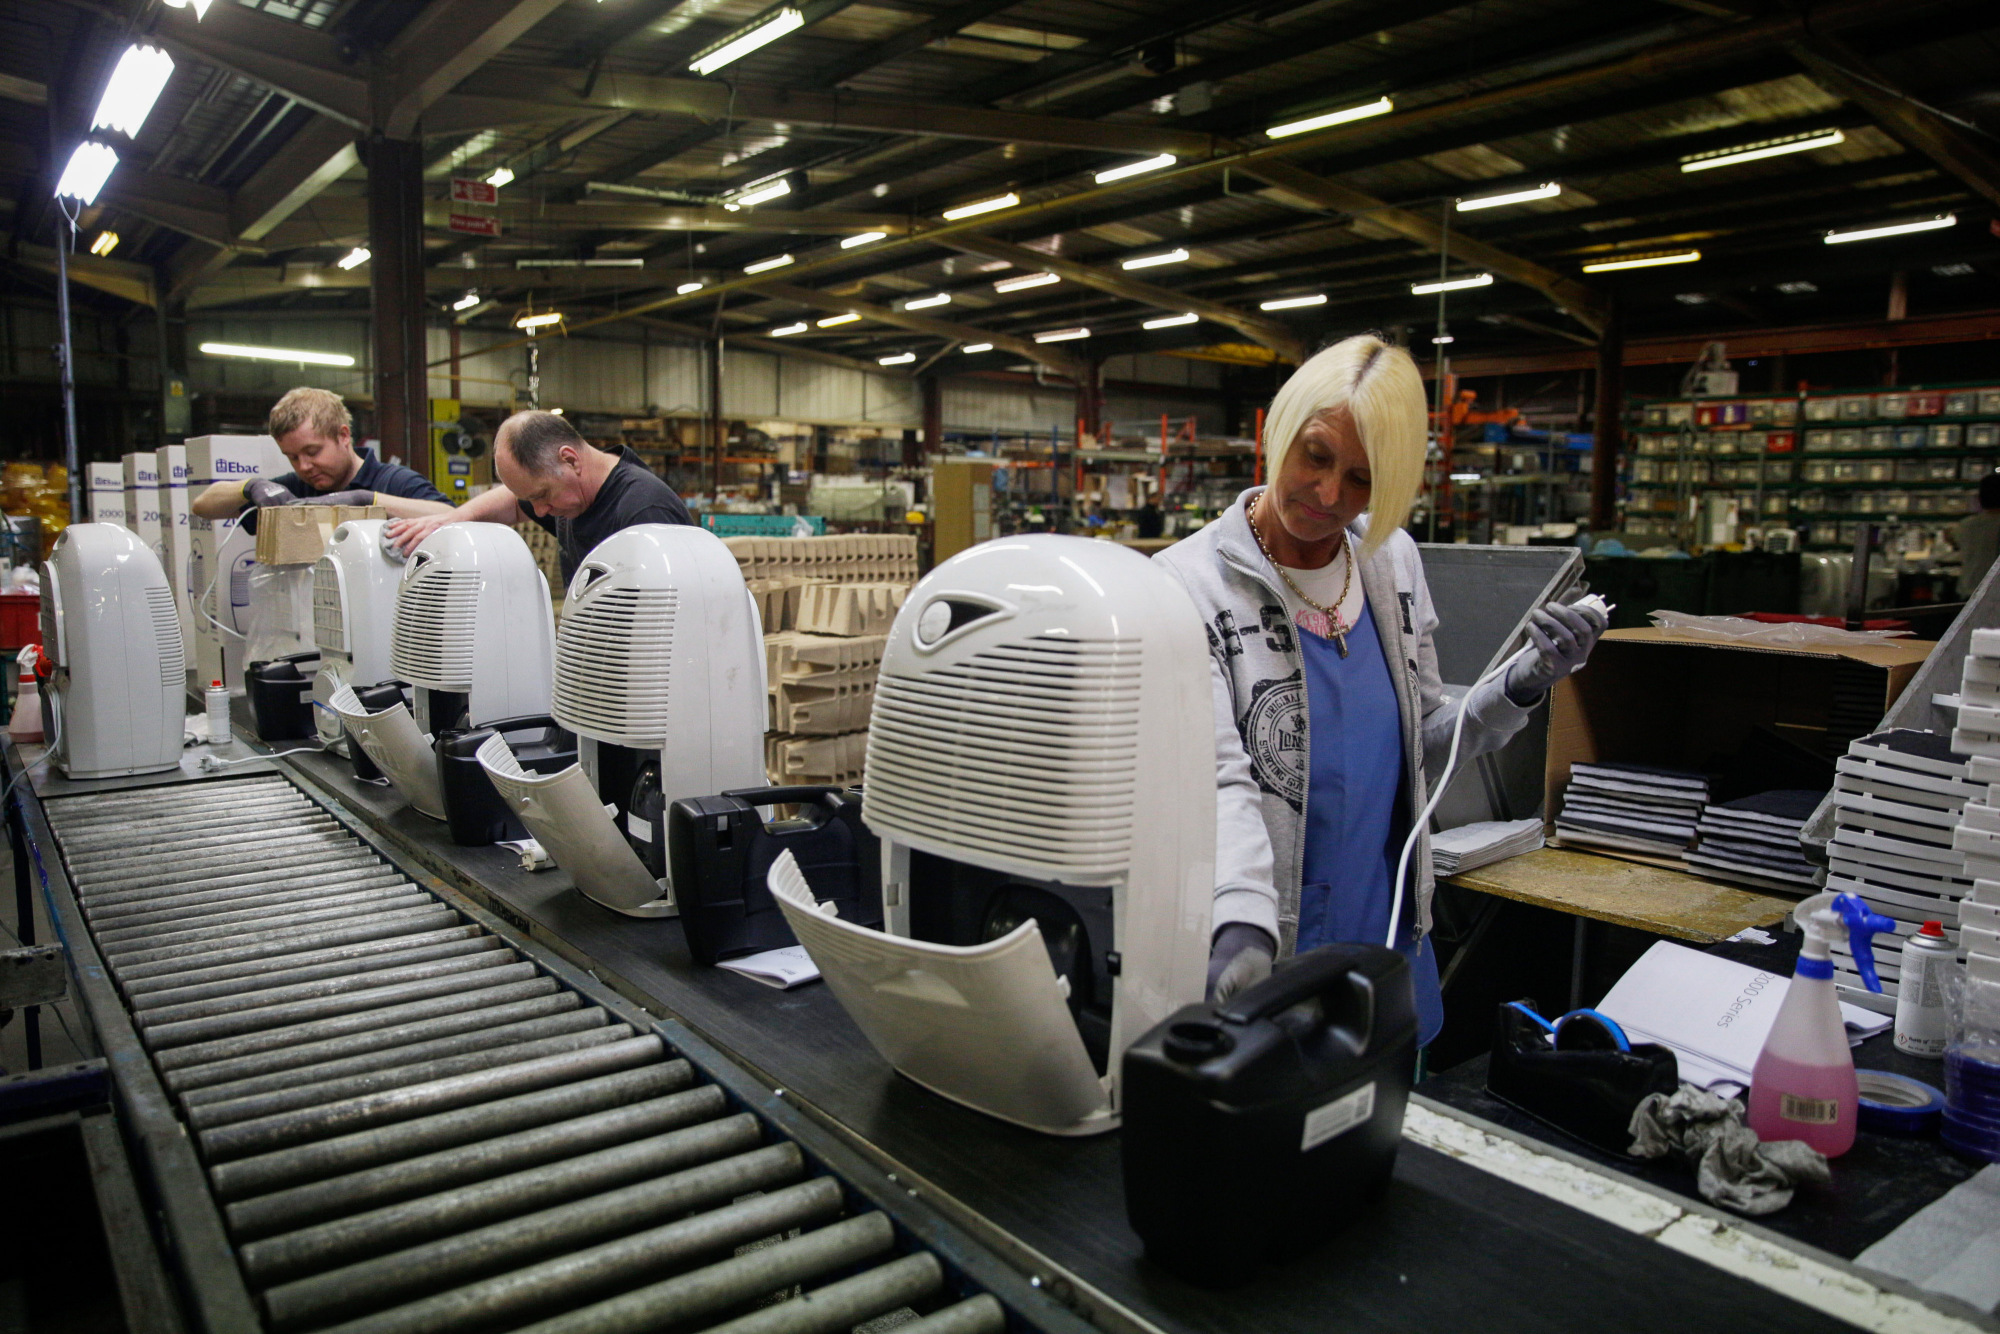 Employees assemble dehumidifiers on the production line at the Ebac Ltd. factory in Newton Aycliffe, U.K.